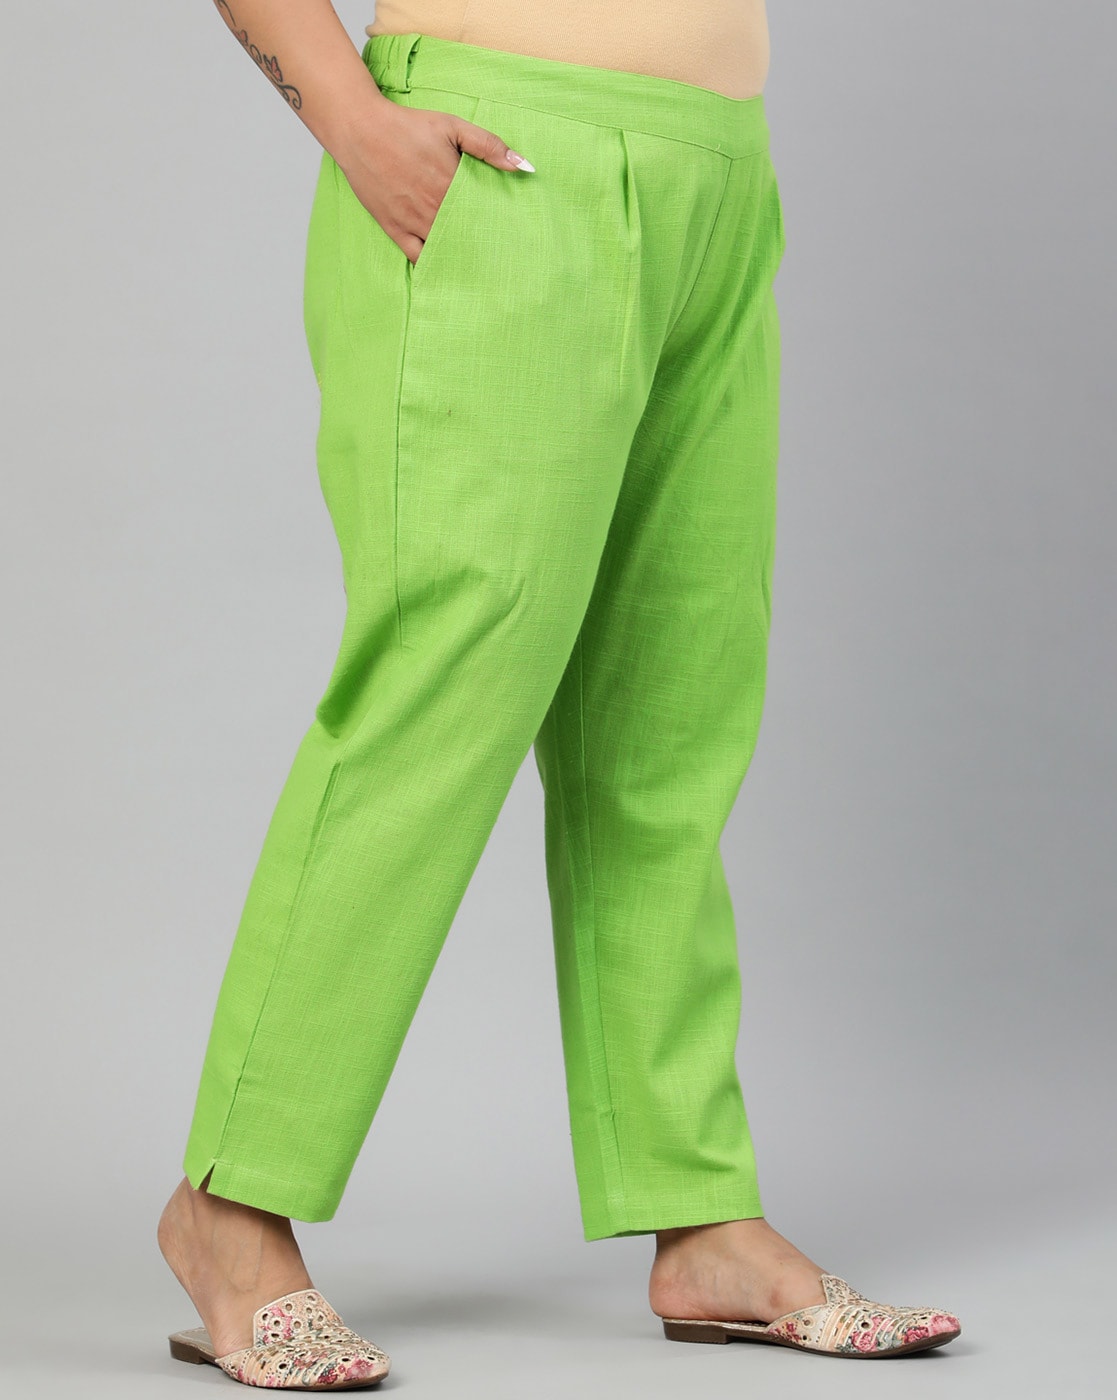 Wide Leg Trousers Women, Ladies Light Green Trousers Solid Color Linen With  Pocket Split Cropped Straight